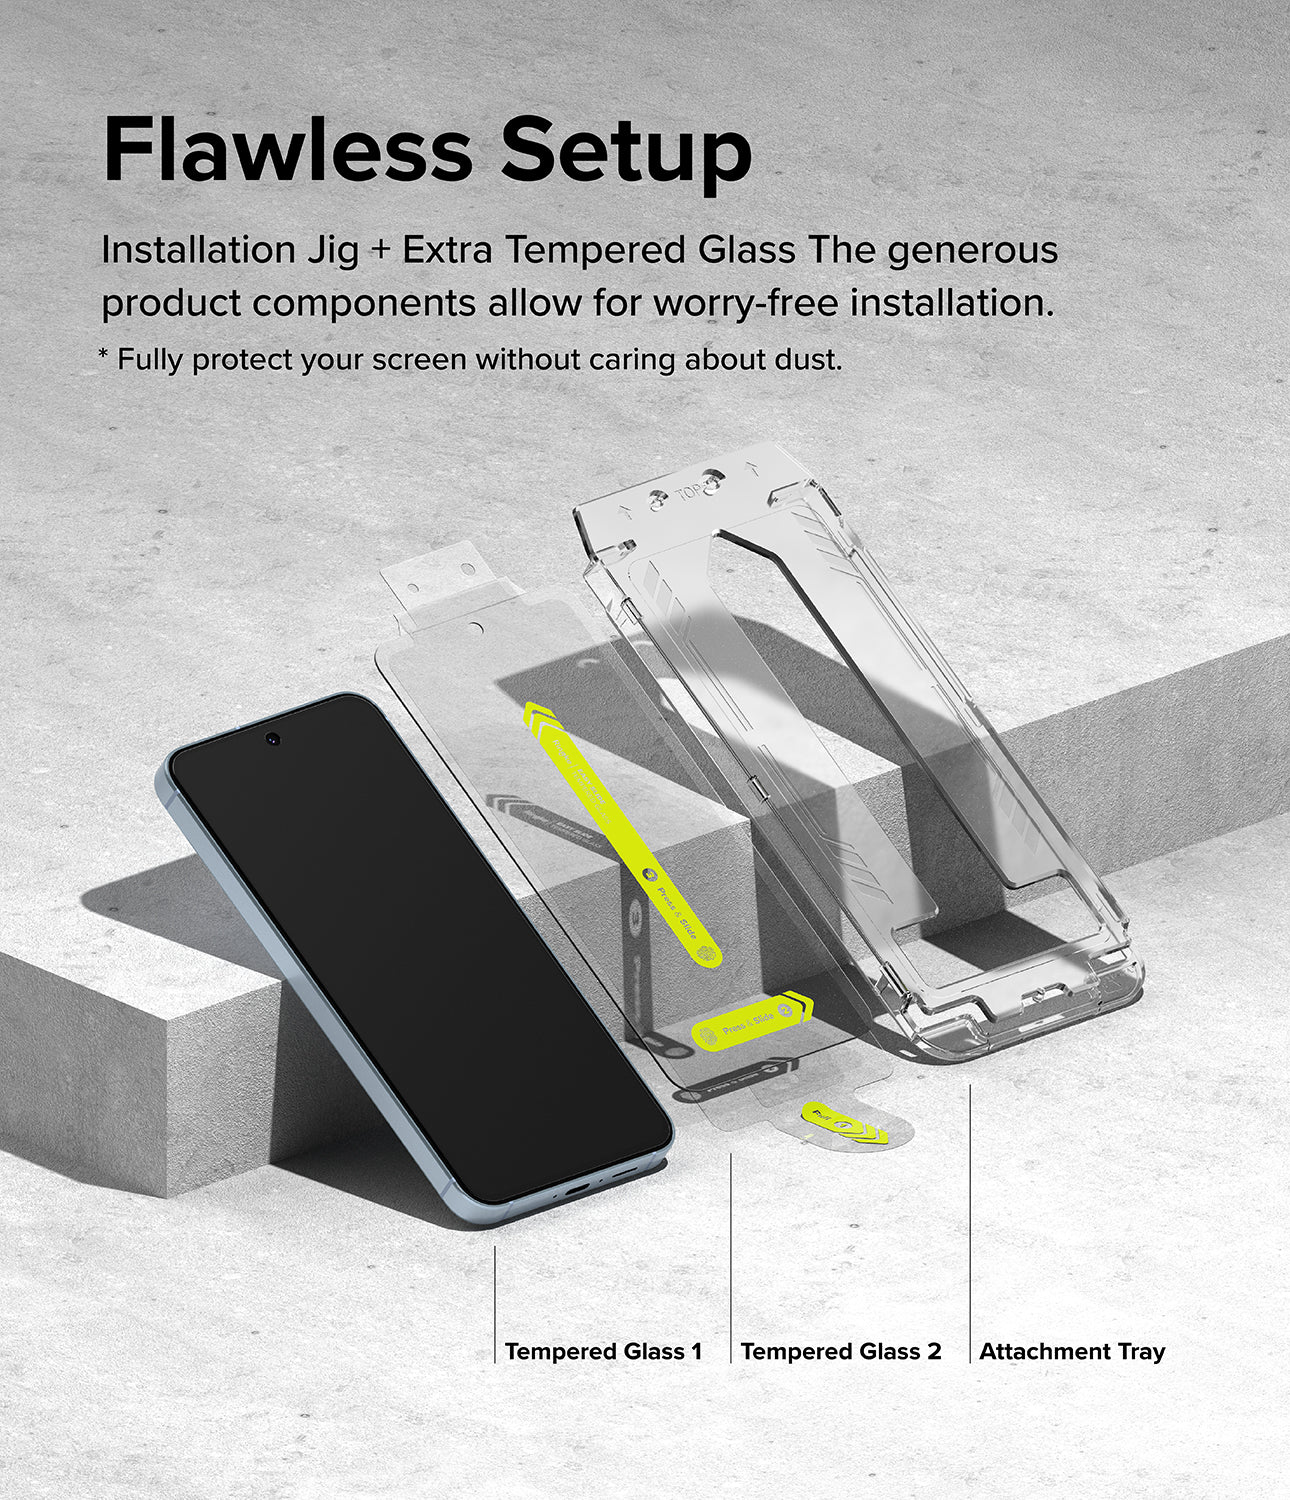 Galaxy A55 Screen Protector | Easy Slide Tempered Glass - Flawless Setup. Installation Jig + extra Tempered Glass. The generous product components allow for worry-free installation.